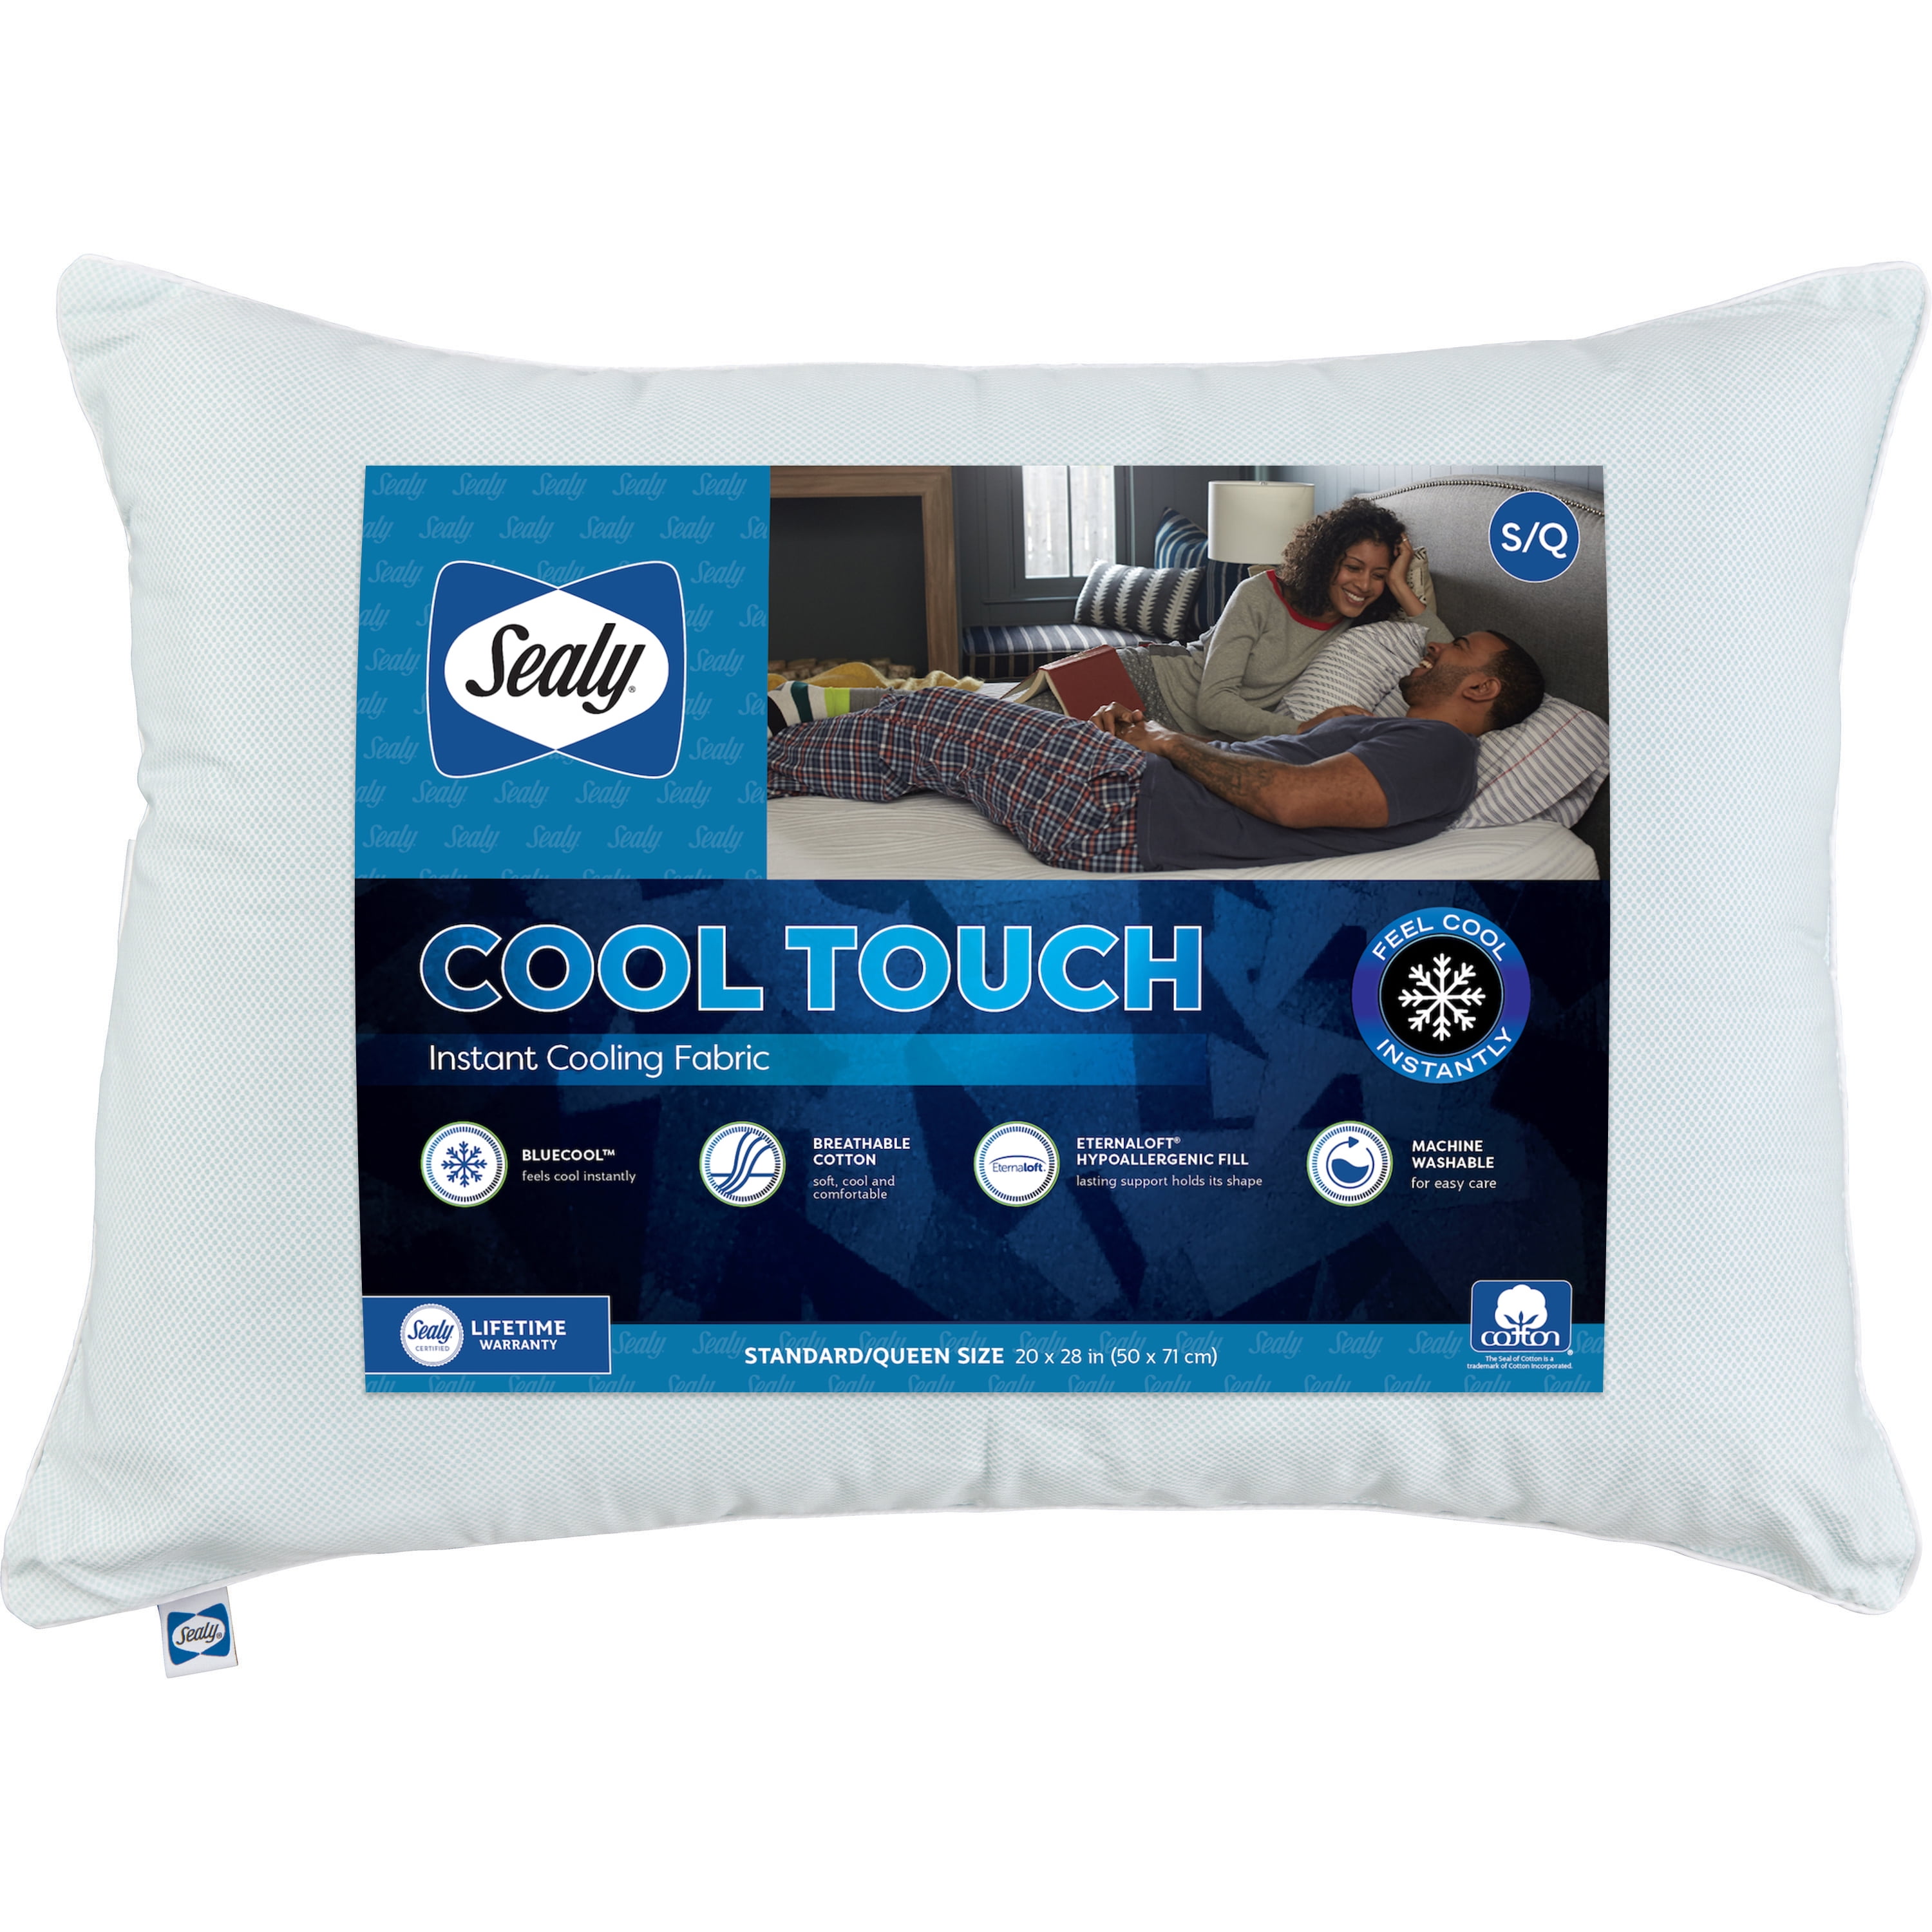 Sealy Cool Touch Pillow - Walmart.com 